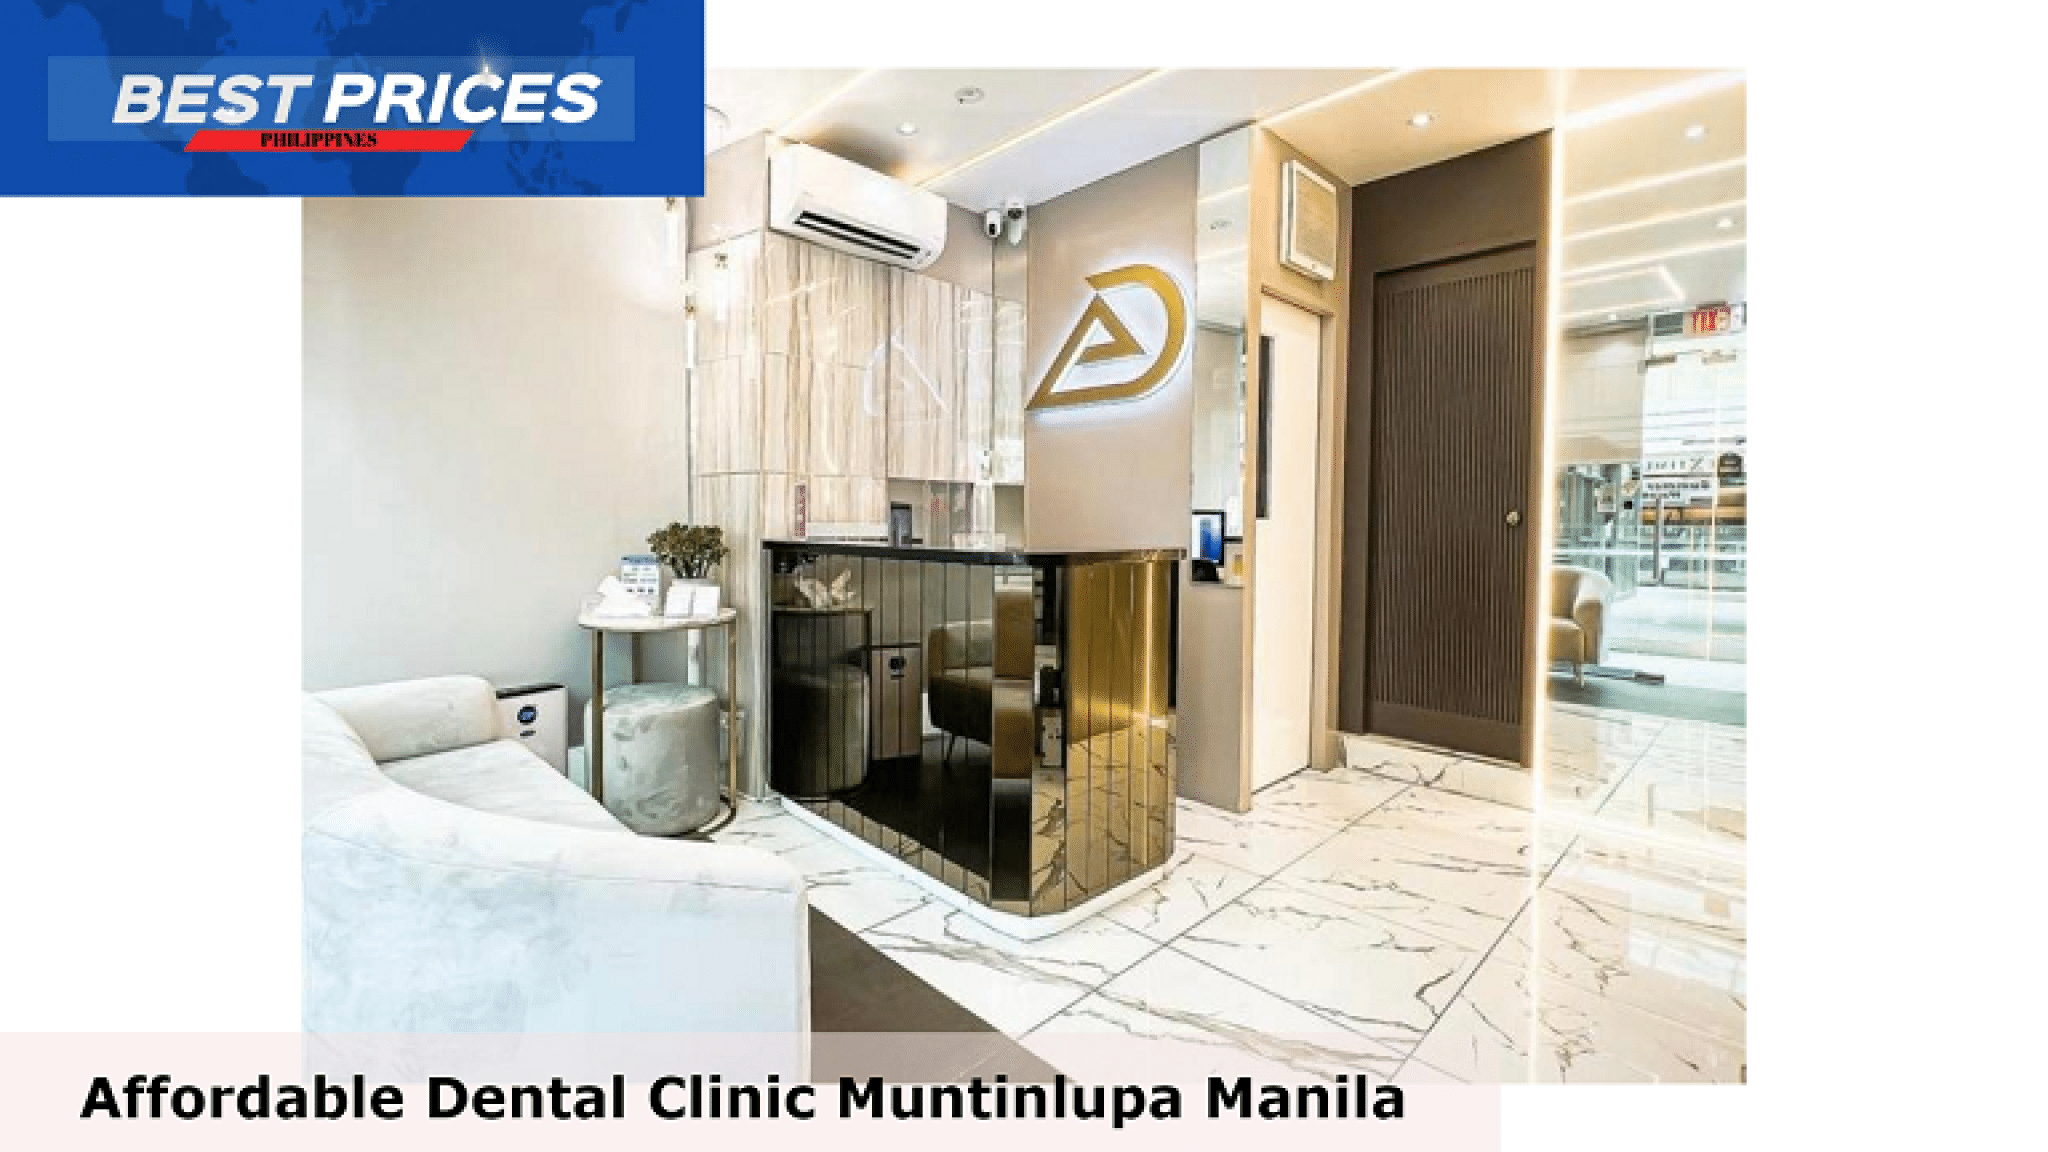 Affordable Dental Clinics In Muntinlupa Manila 2023 Best Prices Philippines